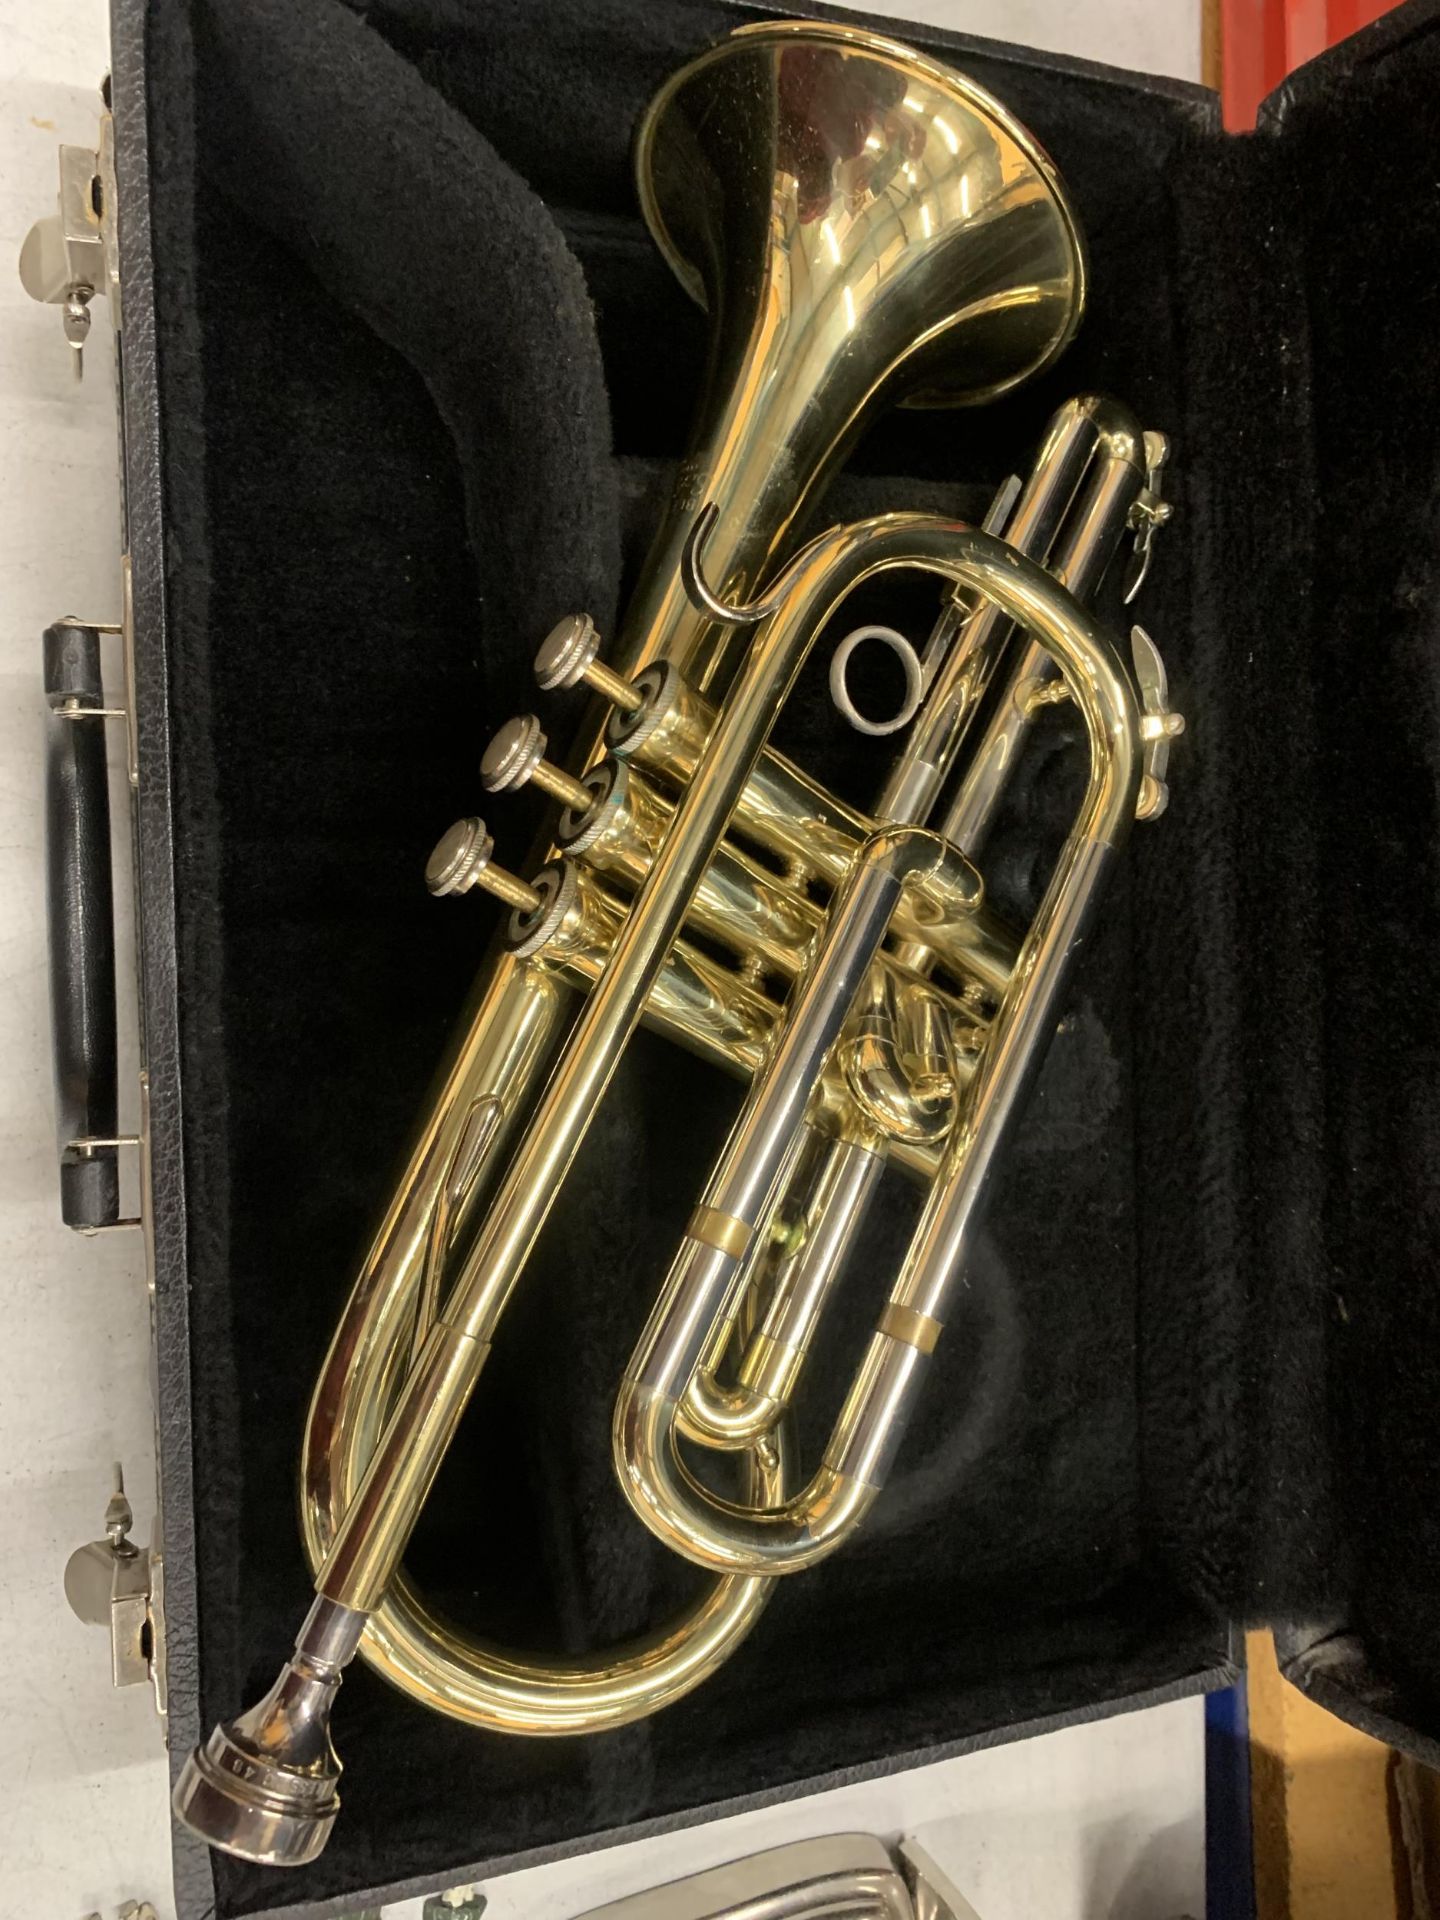 A CASED BLESSING, U.S.A SCHOLASTIC TRUMPET - Image 3 of 8